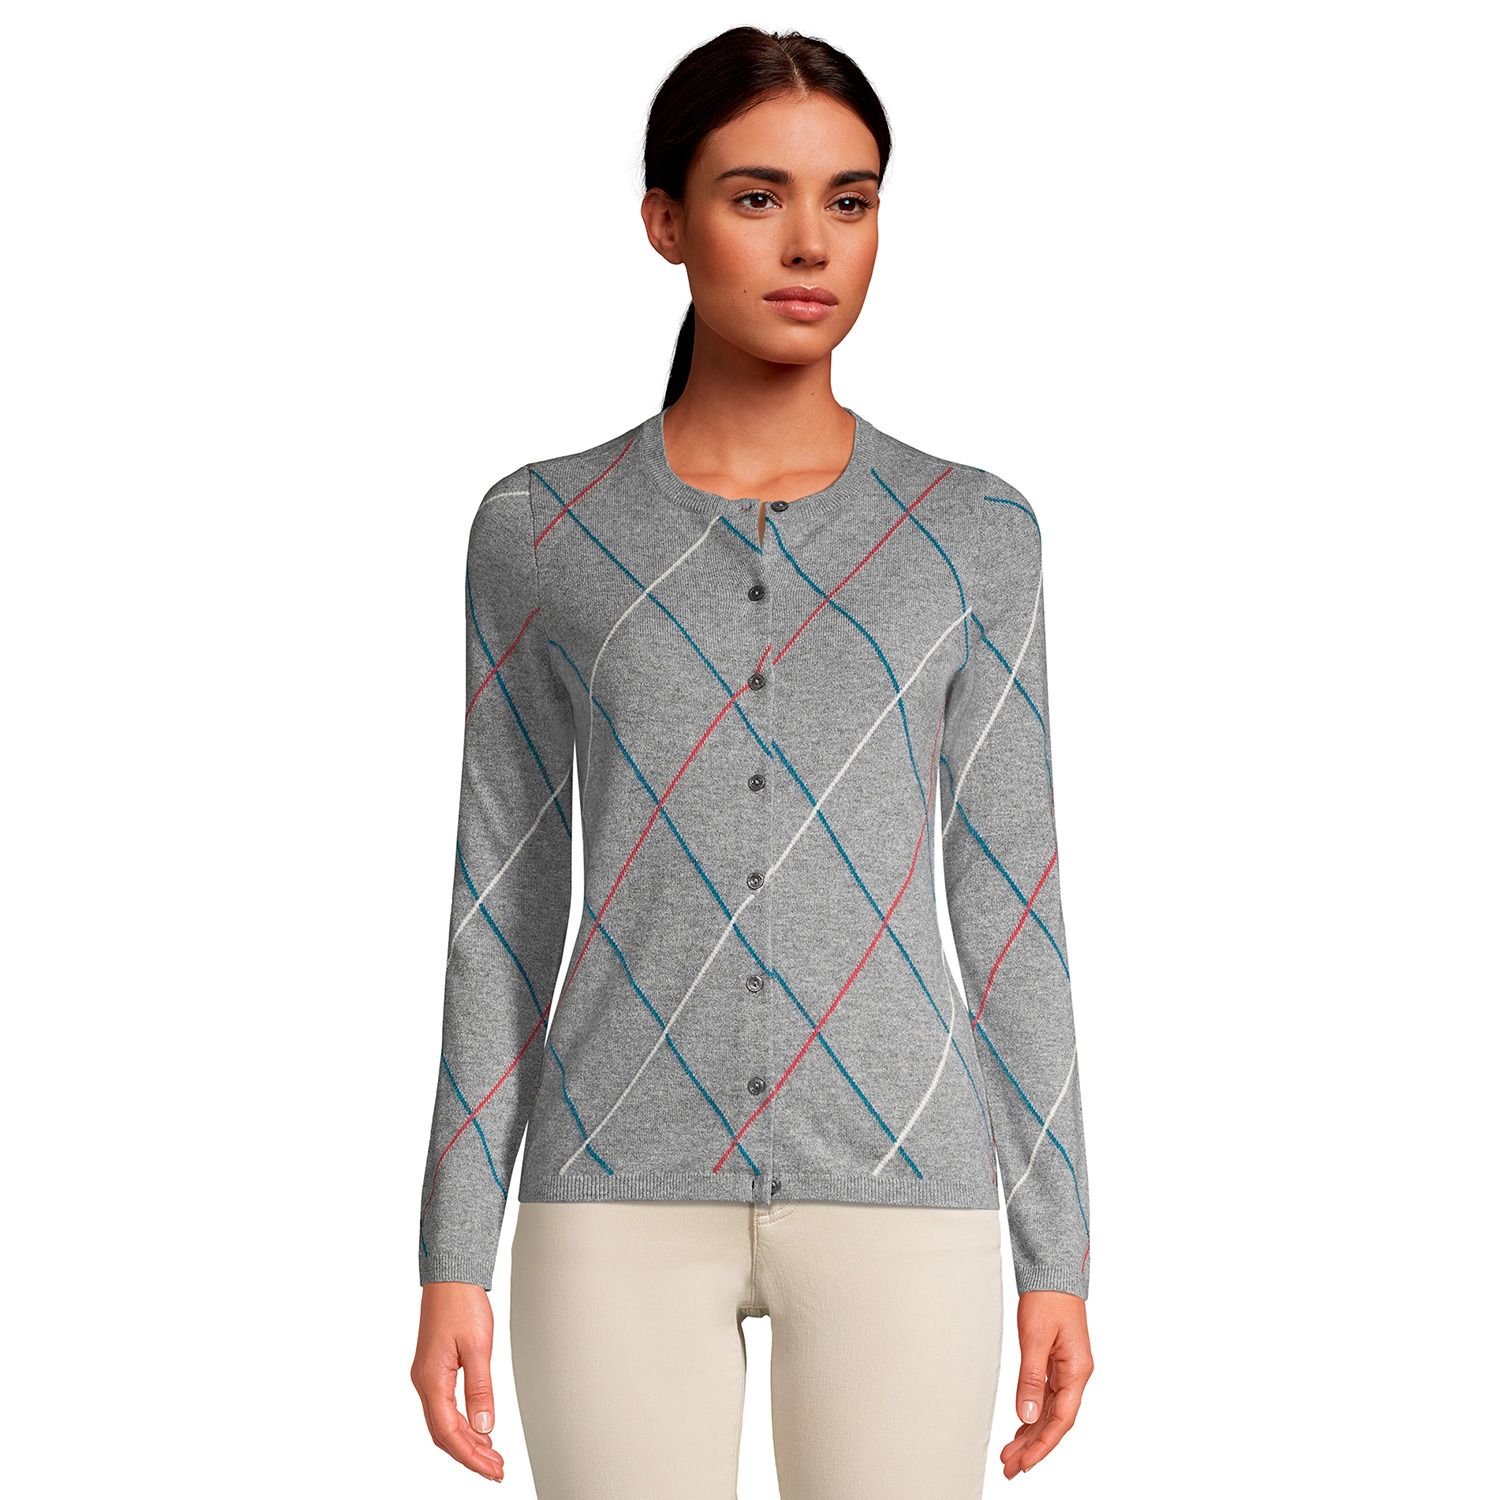 Image for Lands' End Petite Print Cashmere Cardigan Sweater at Kohl's.